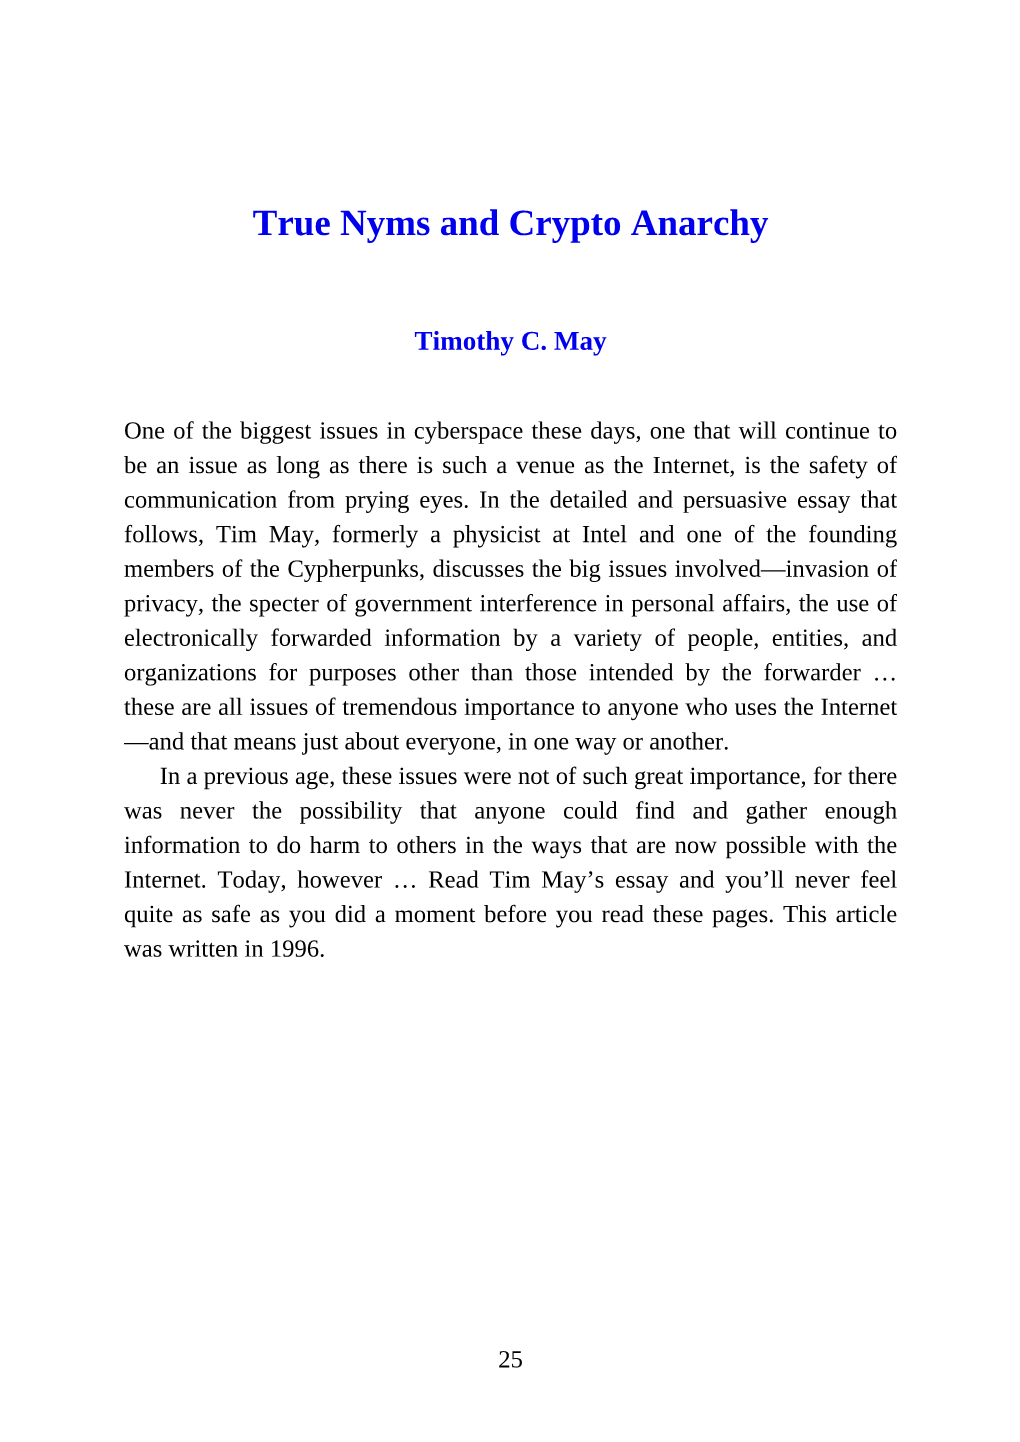 True Nyms and Crypto Anarchy